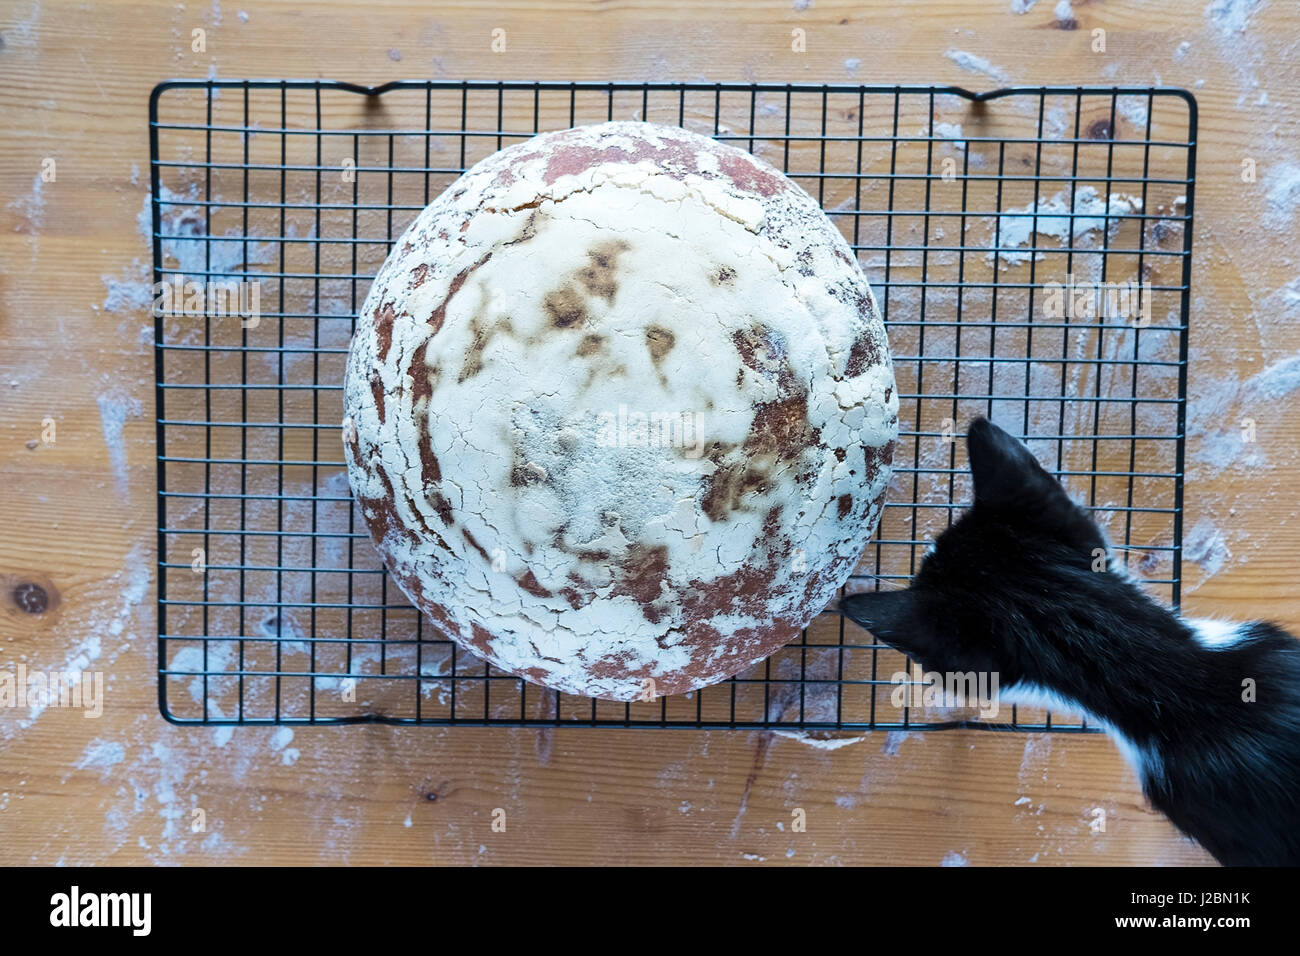 cat checking fresh home made loaf of sourdough bread Stock Photo